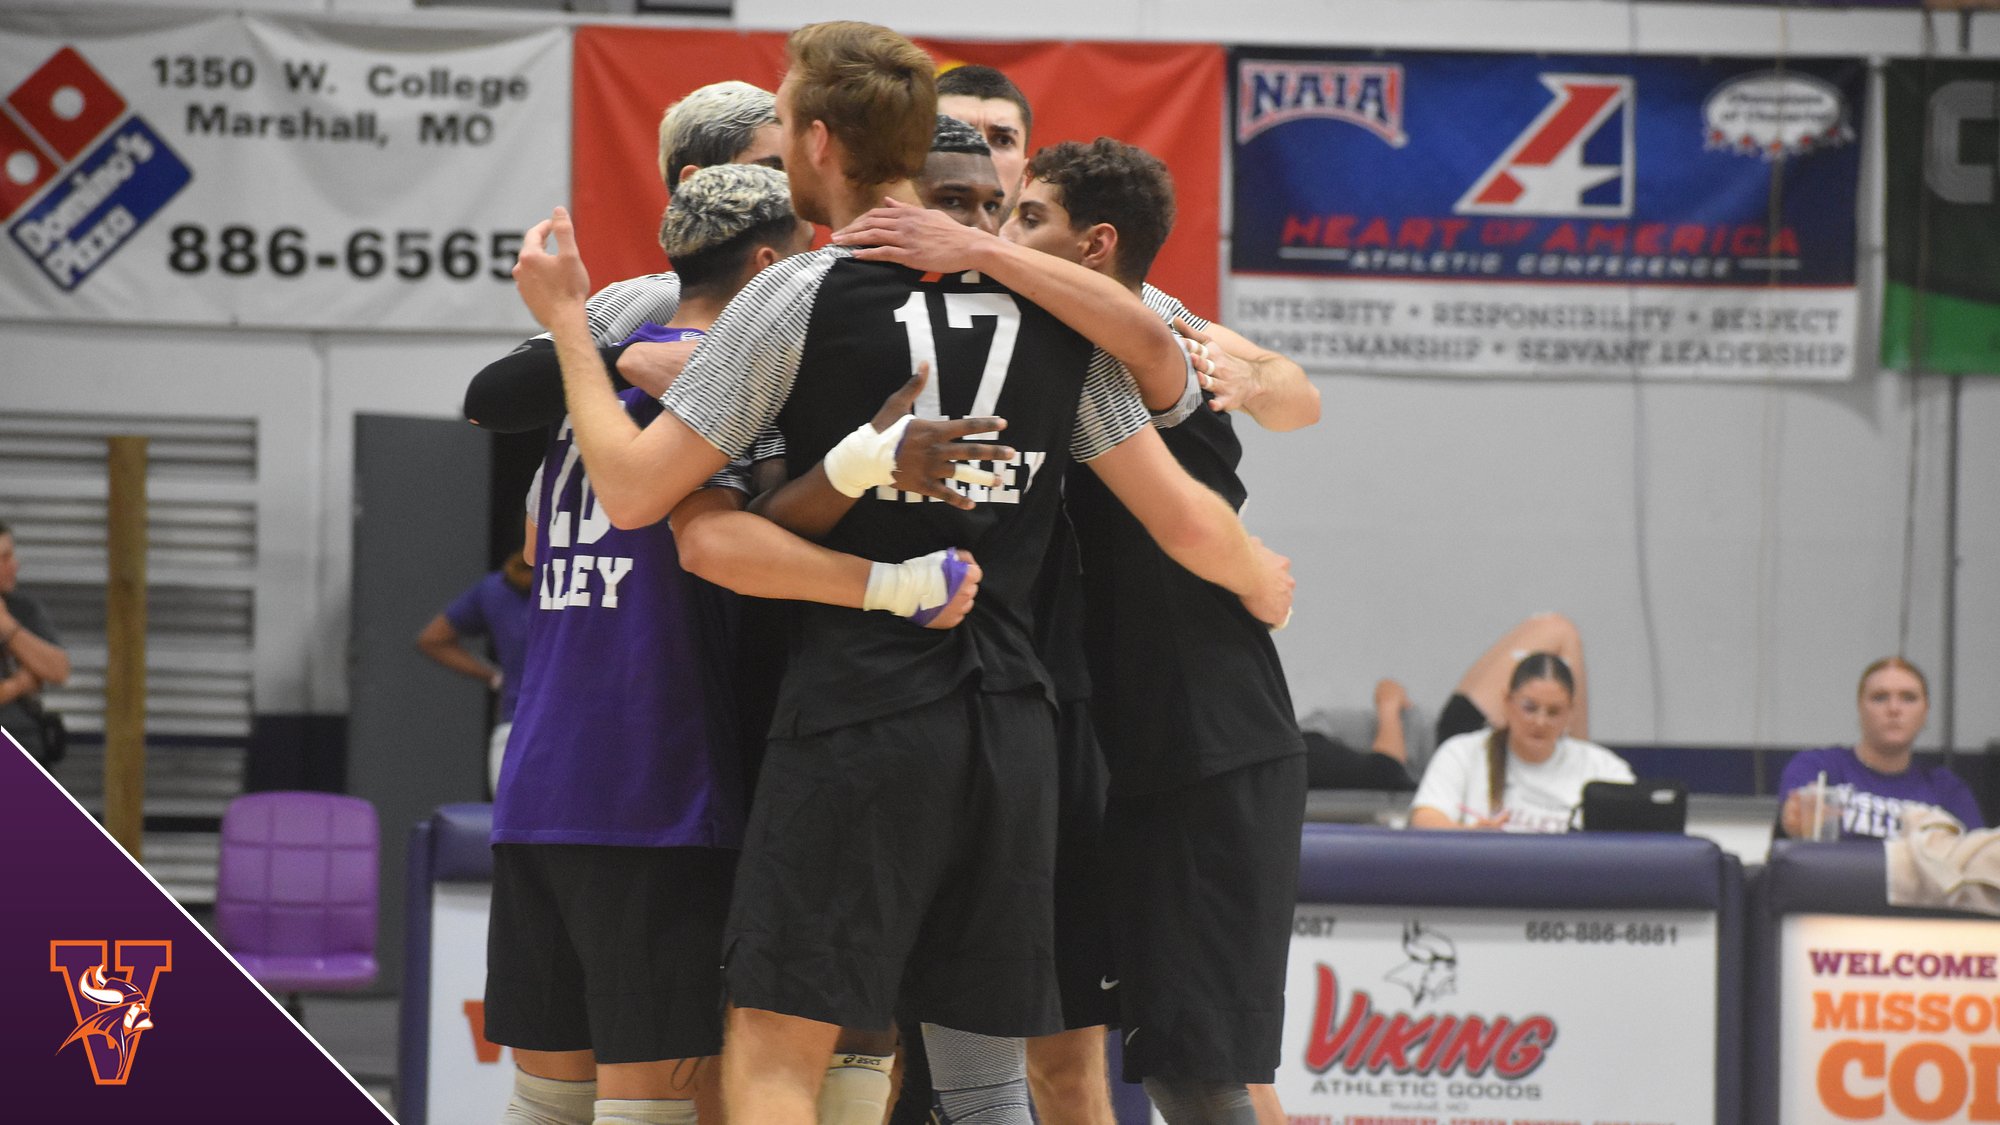 Men's Volleyball Falls to Grand View in Semifinal Match